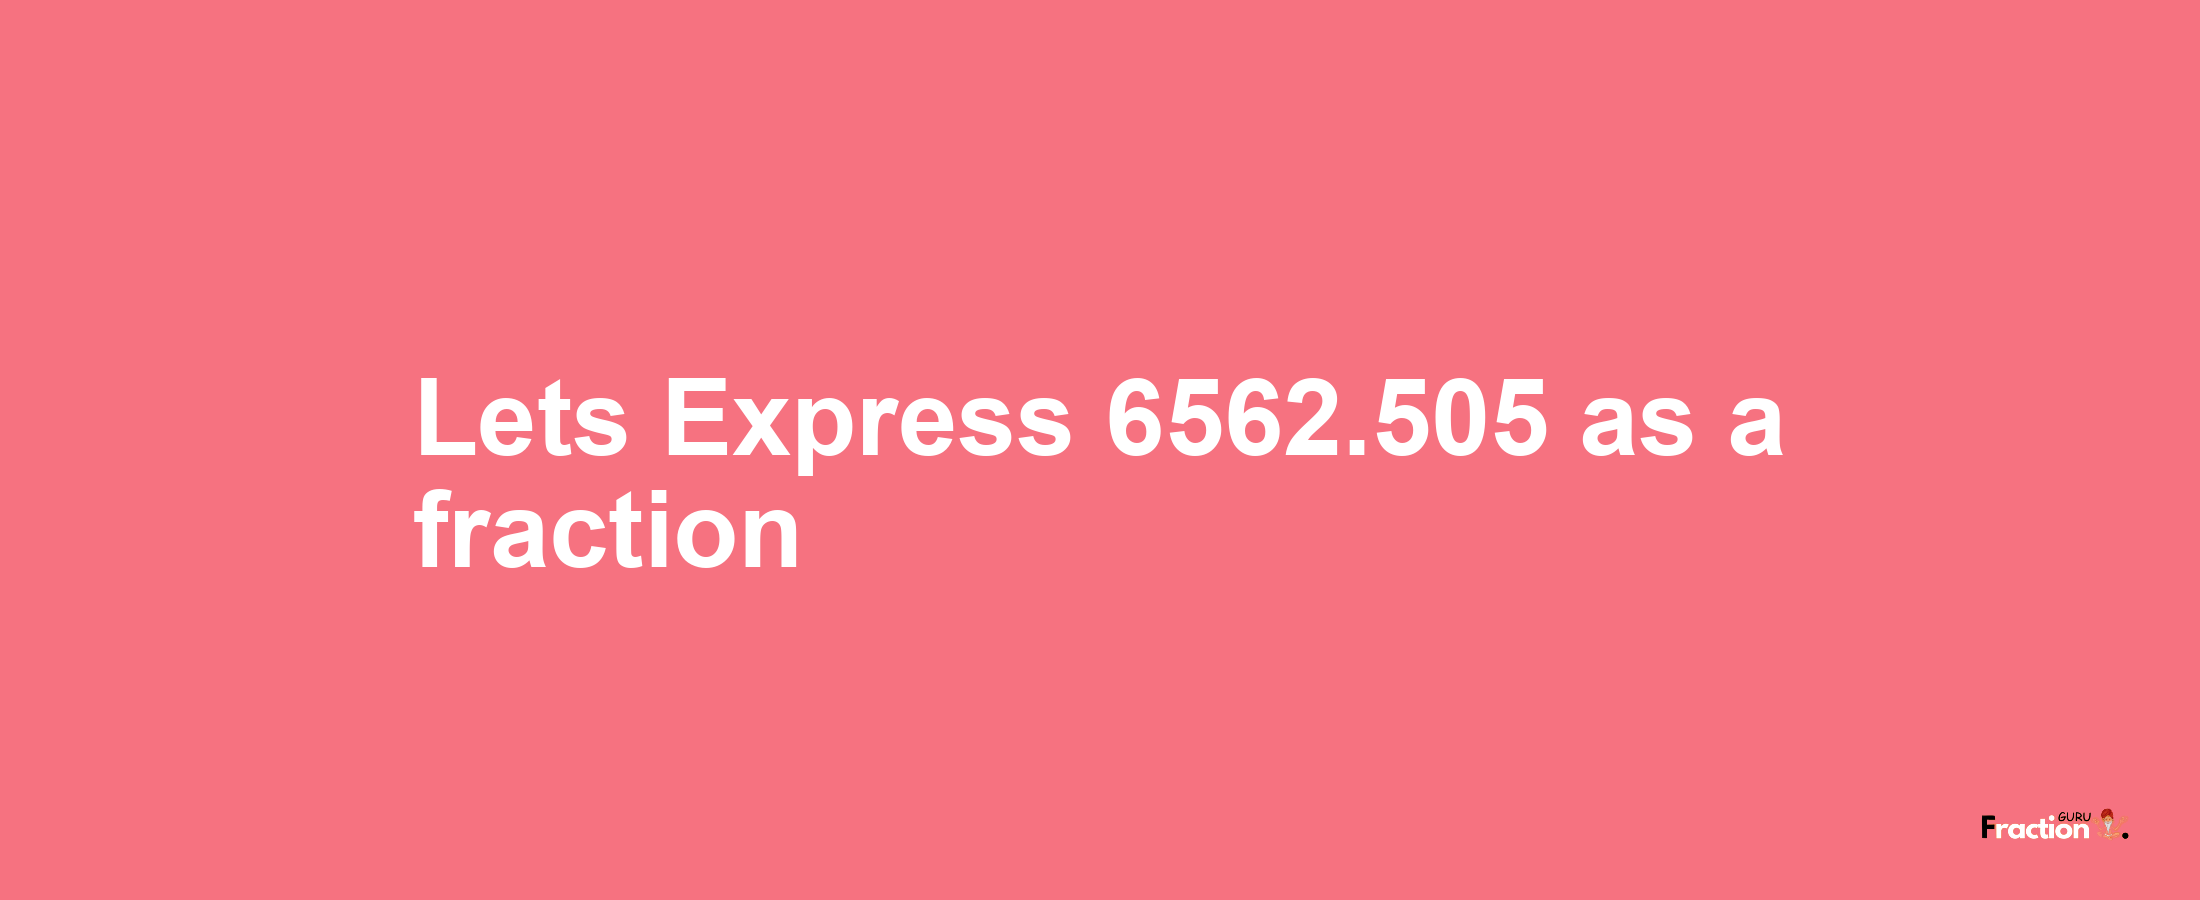 Lets Express 6562.505 as afraction